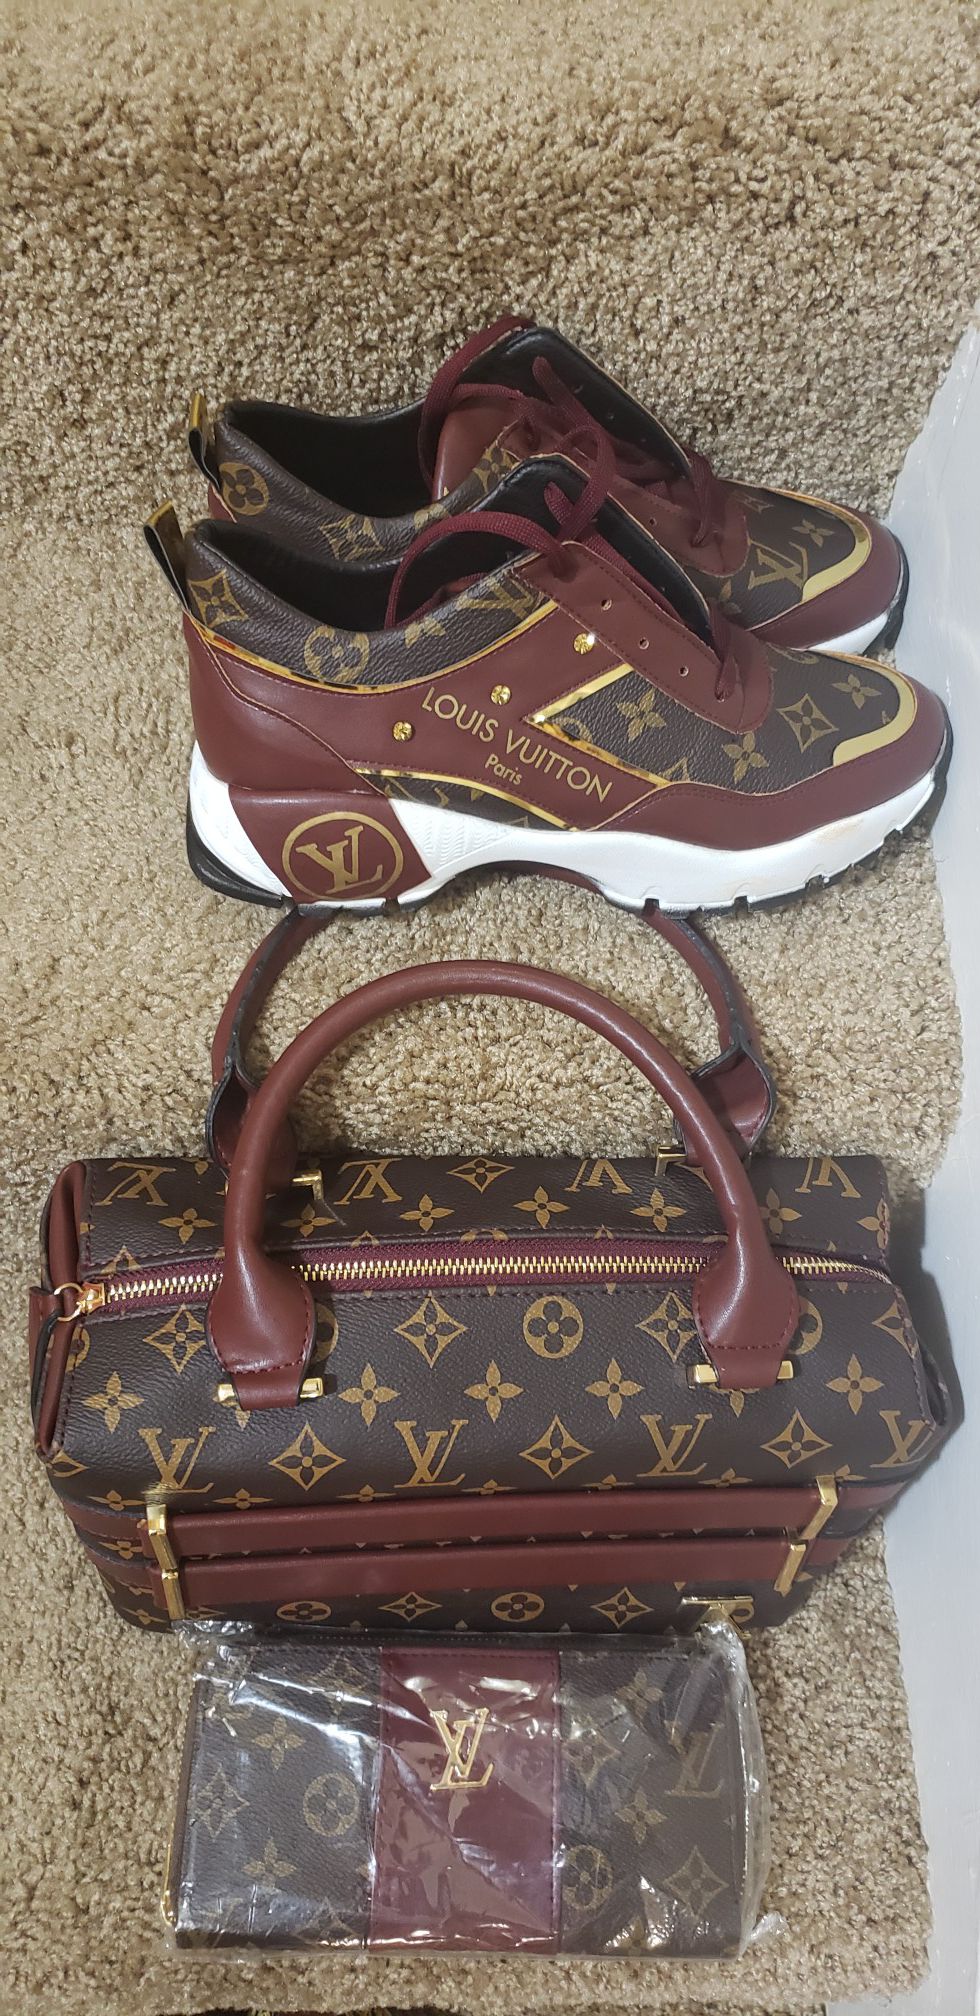 Louis Vuitton bag and shoes in stock brand new